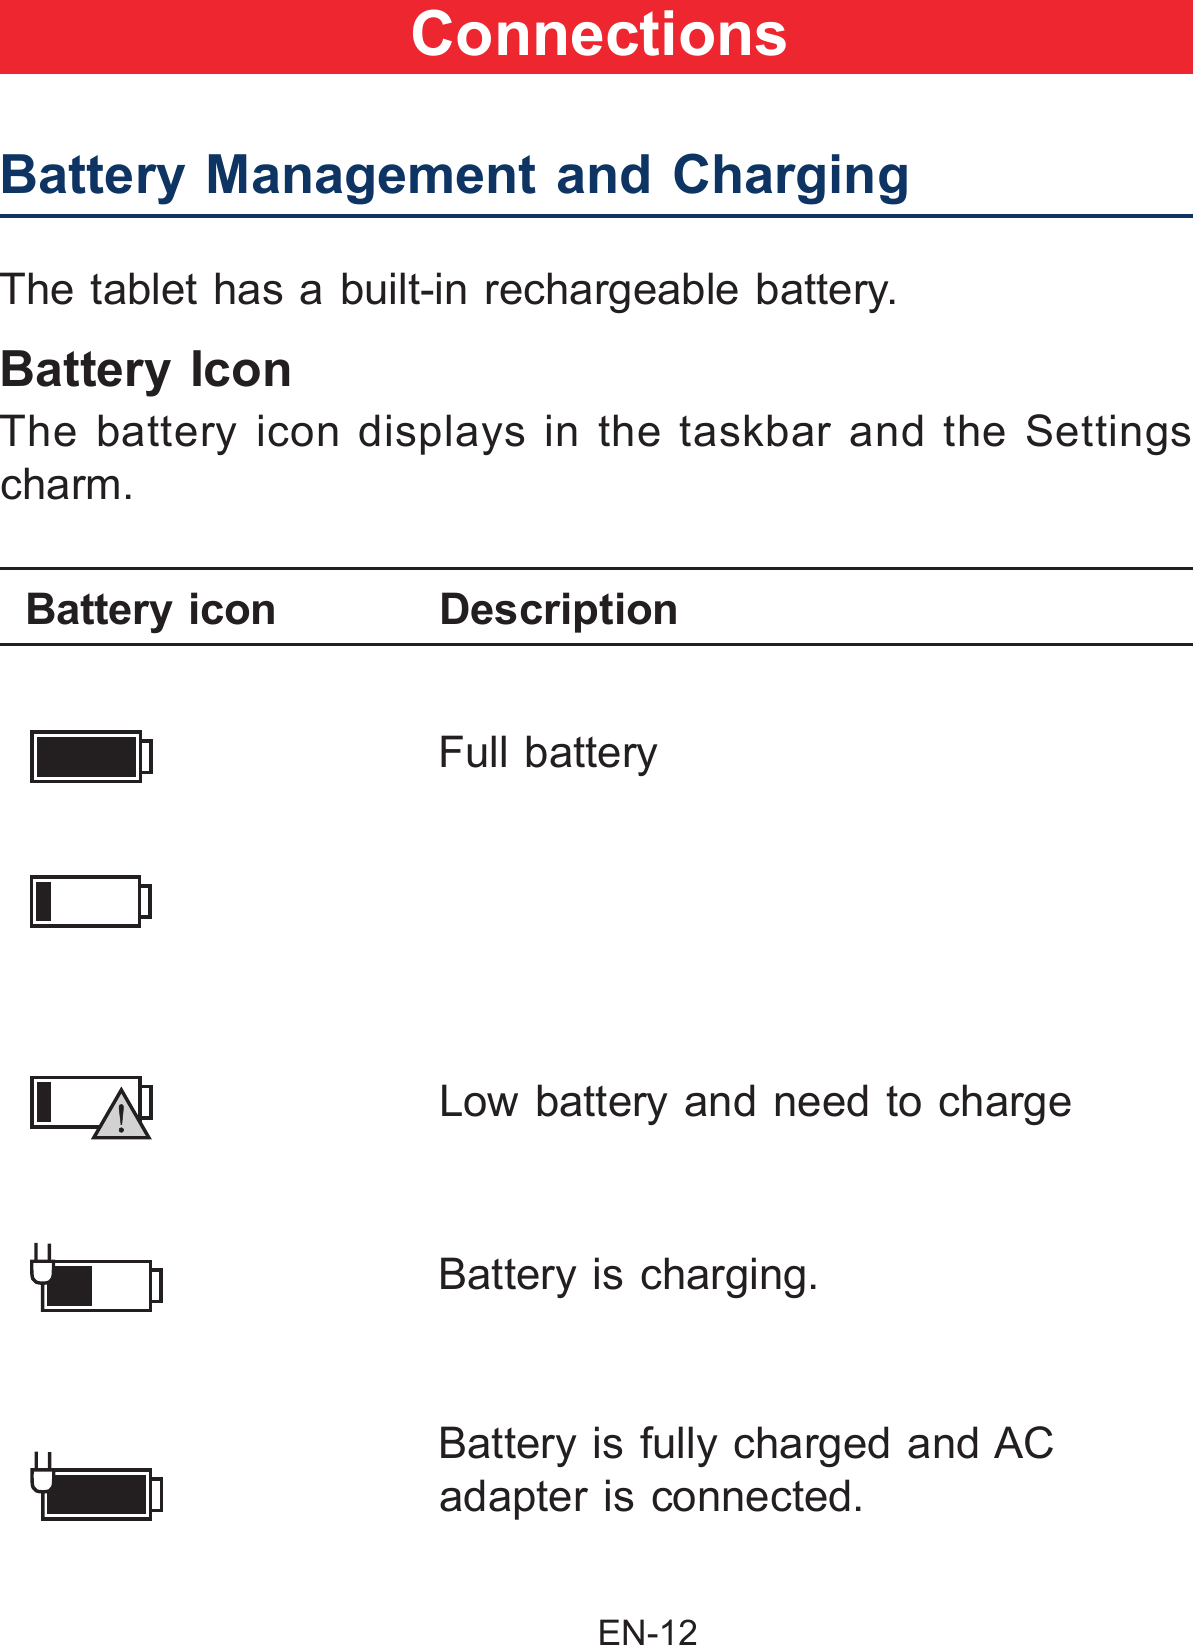                                                EN-12 ConnectionsBattery Management and Charging  Full battery Low battery and need to charge Battery is charging.Battery is fully charged and AC adapter is connected.Battery icon Description The tablet has a built-in rechargeable battery.Battery IconThe battery icon displays in the taskbar and the Settings charm.